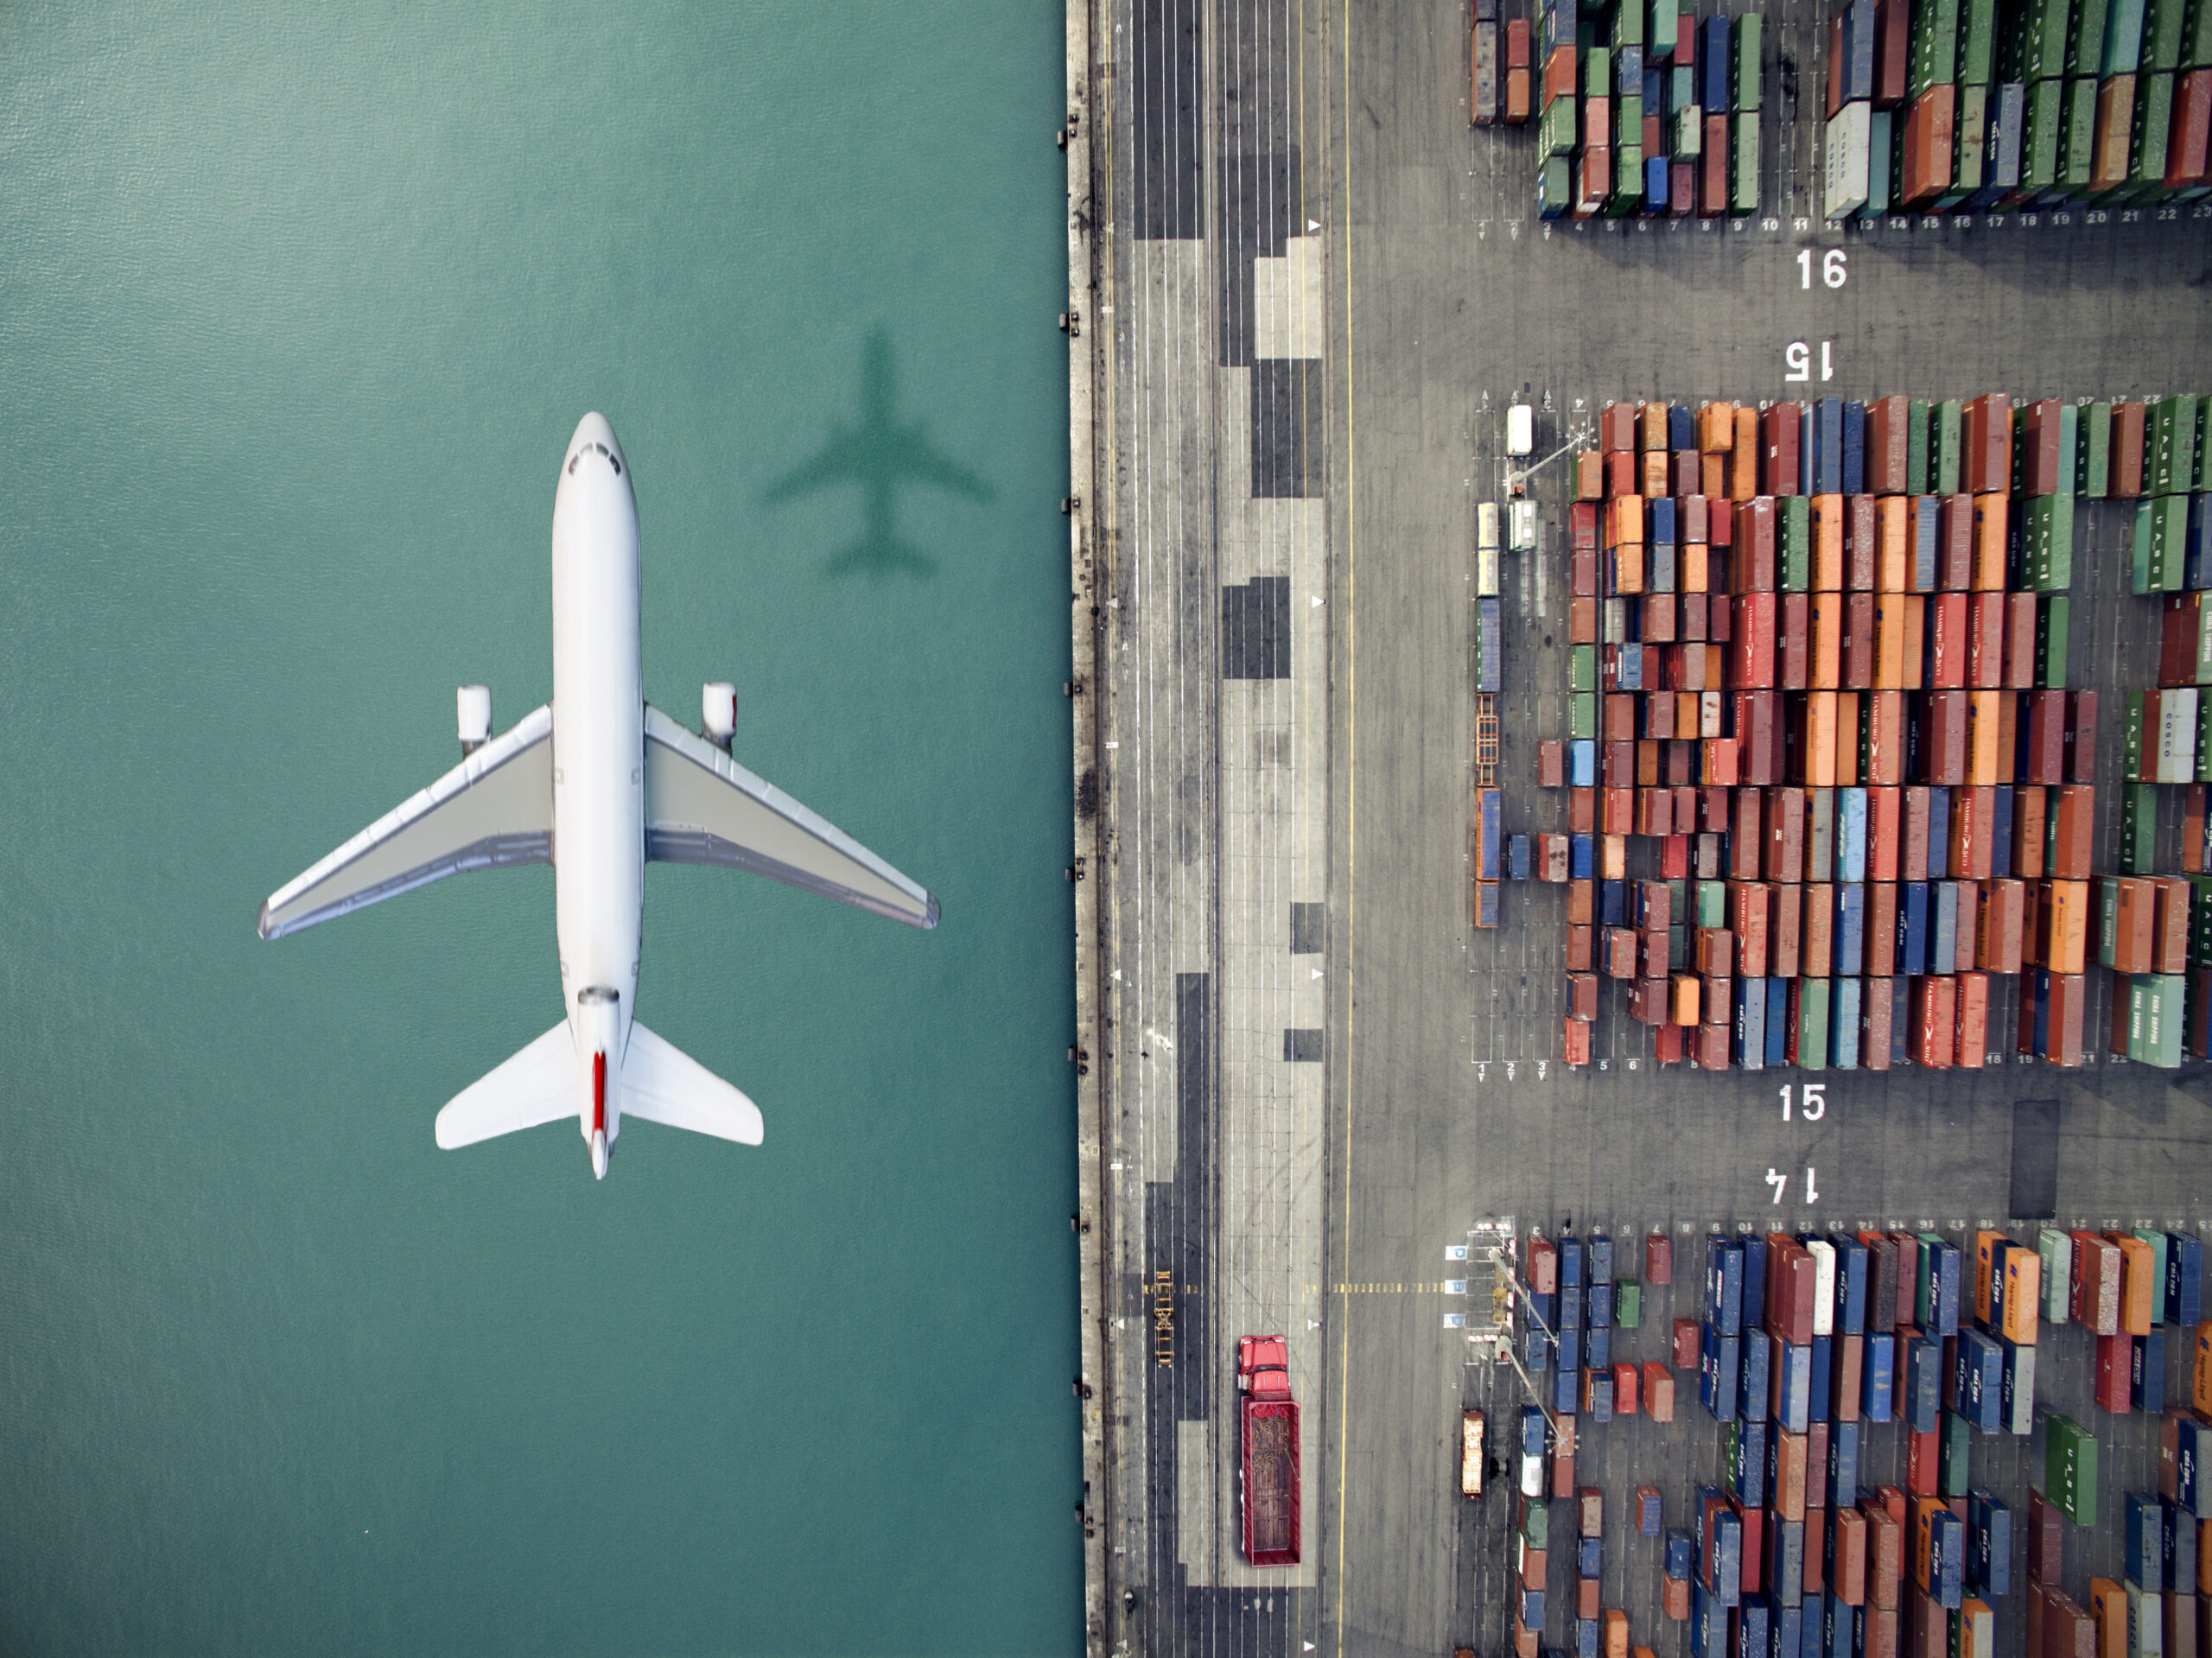 An overhead view of a jet plane flying over a waterway with colorful shipping containers stacked nearby.